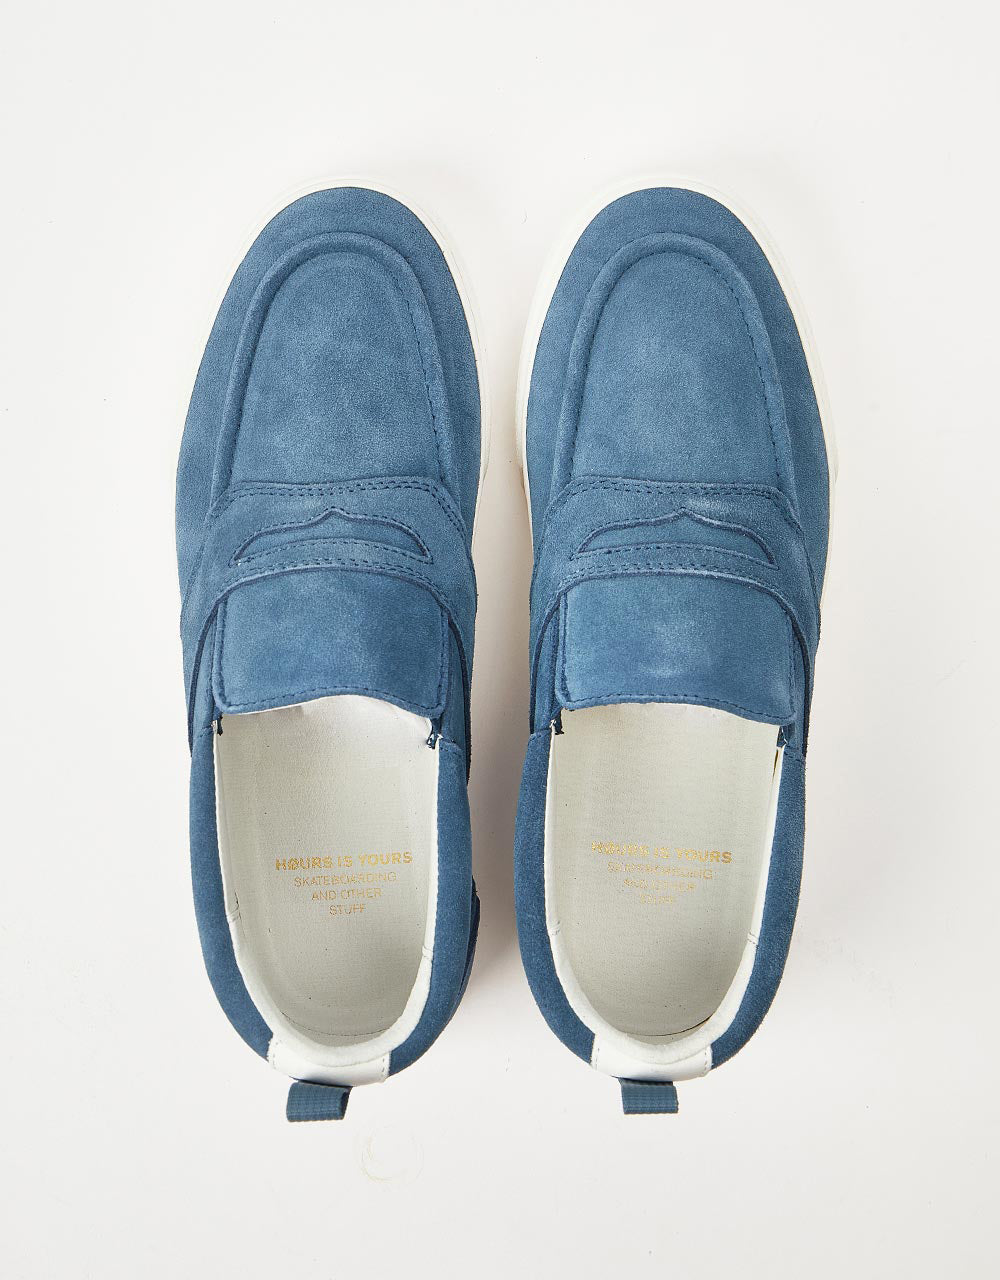 HØURS IS YOURS Cohiba SL30 Skate Shoes - Modern Blue